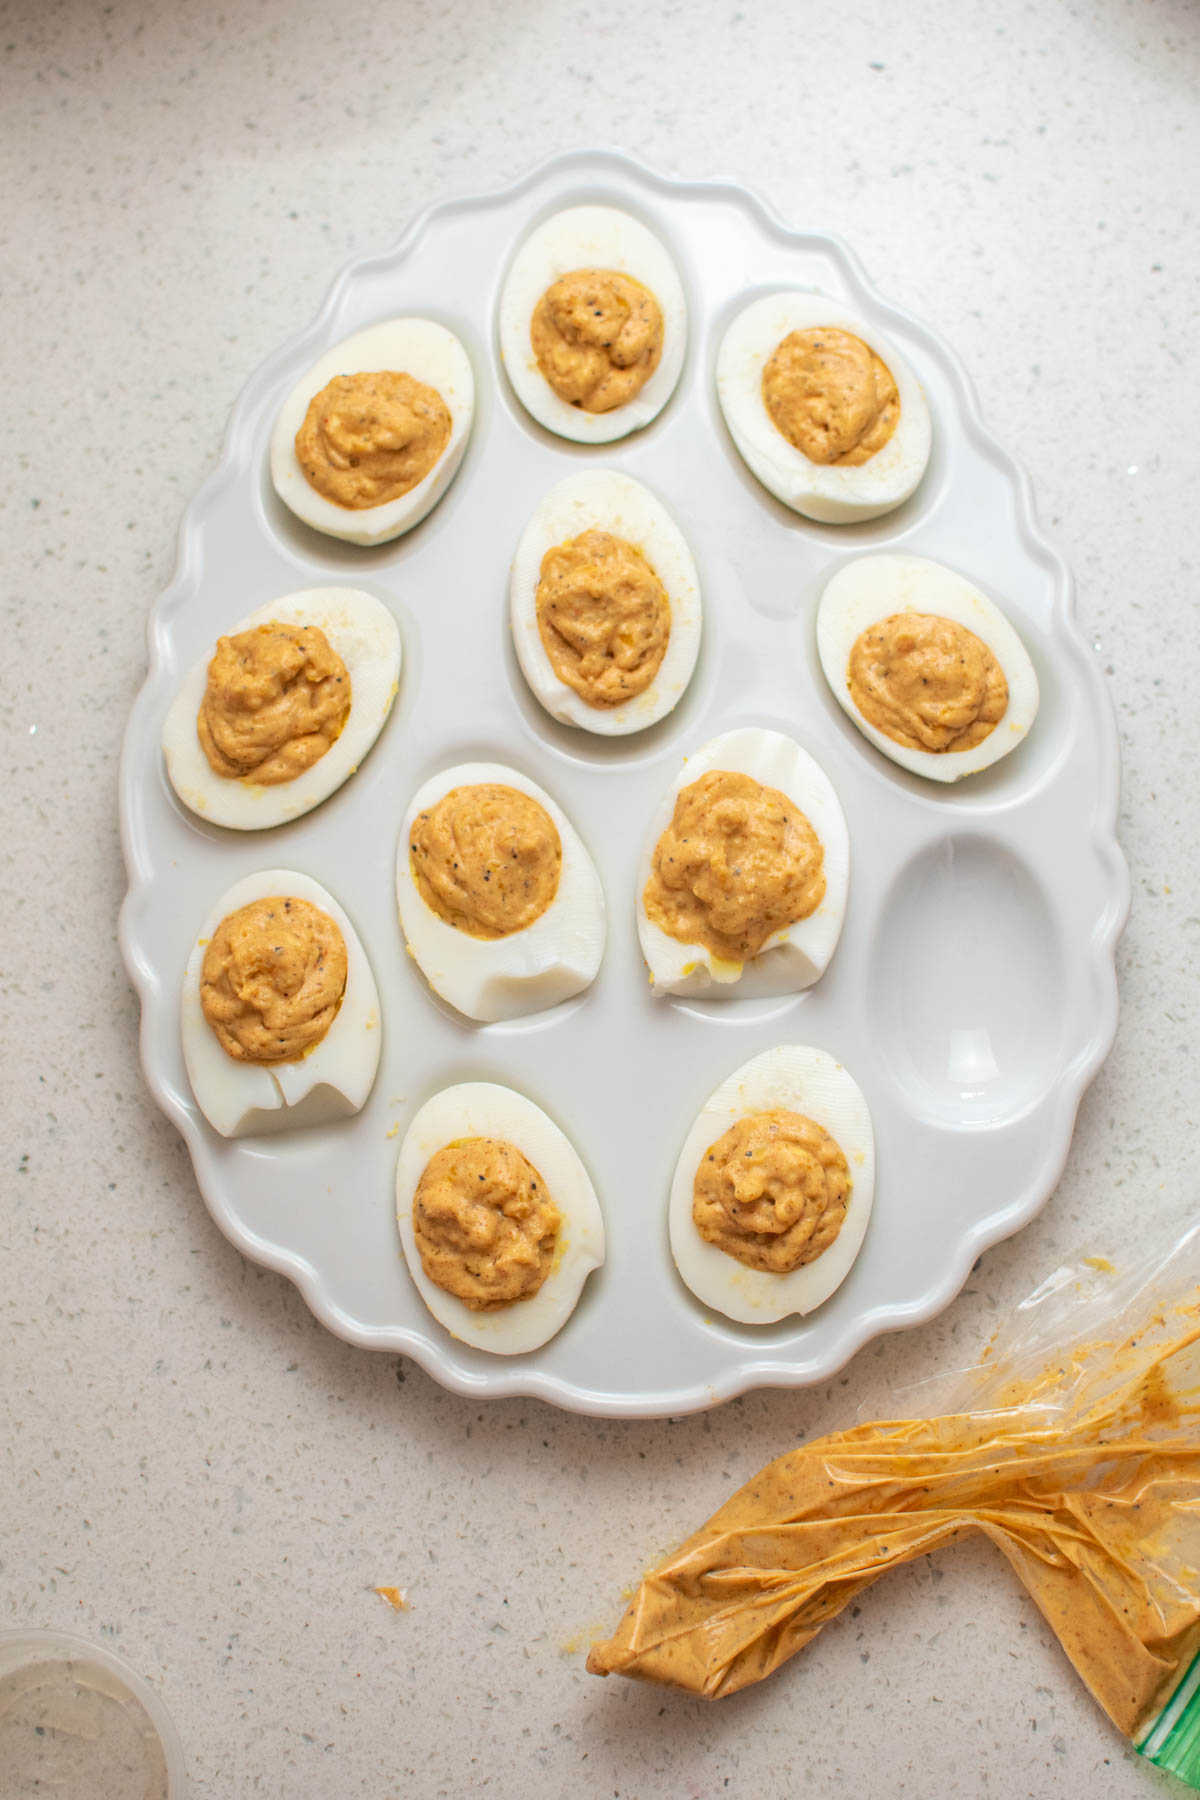 Deviled eggs on white egg-shaped platter with bag of filling nearby.